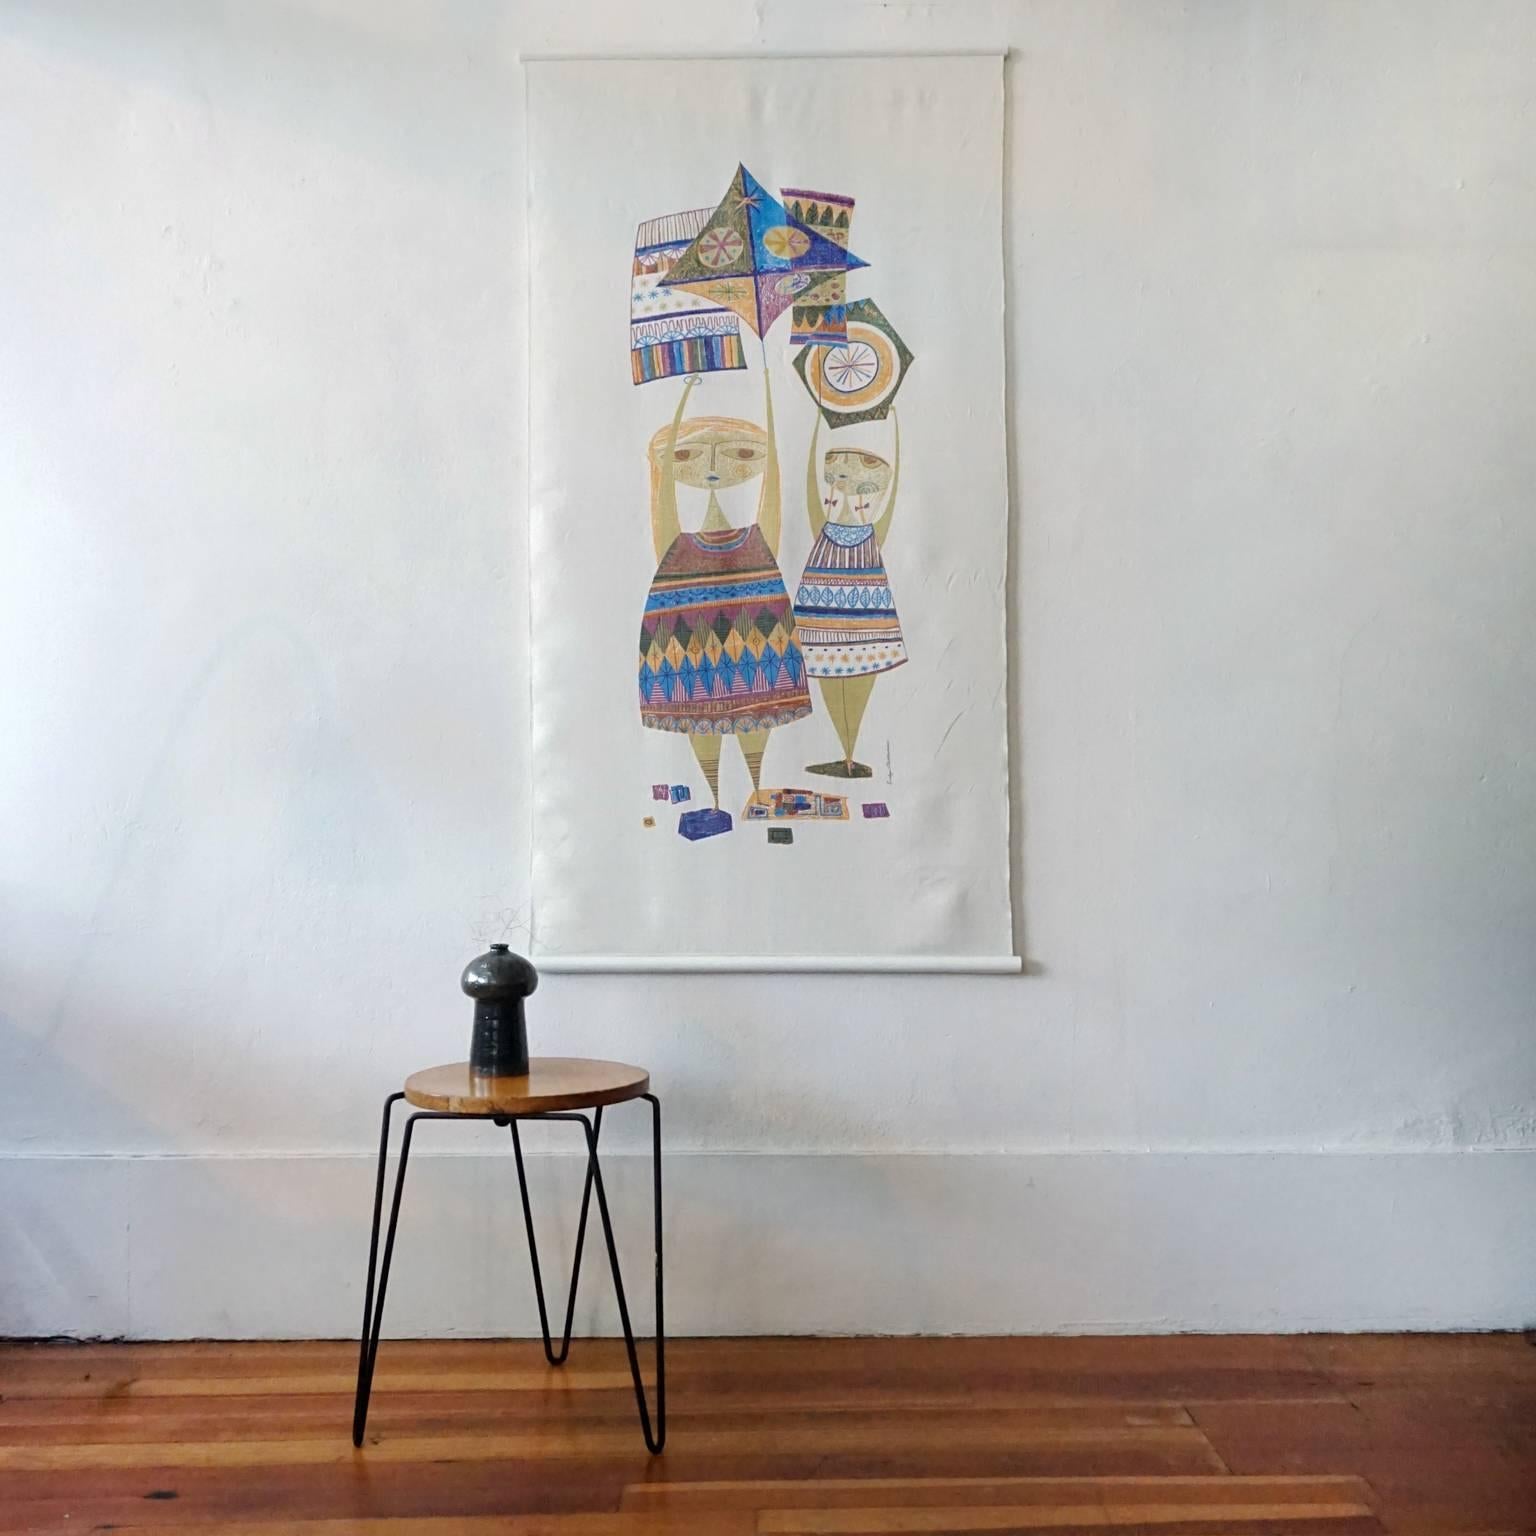 Kites by Evelyn Ackerman was the first wall hanging textile she designed. It was featured on the cover of the Los Angeles Times Home magazine in 1958. Silkscreen on linen, with dowels on the top and bottom.